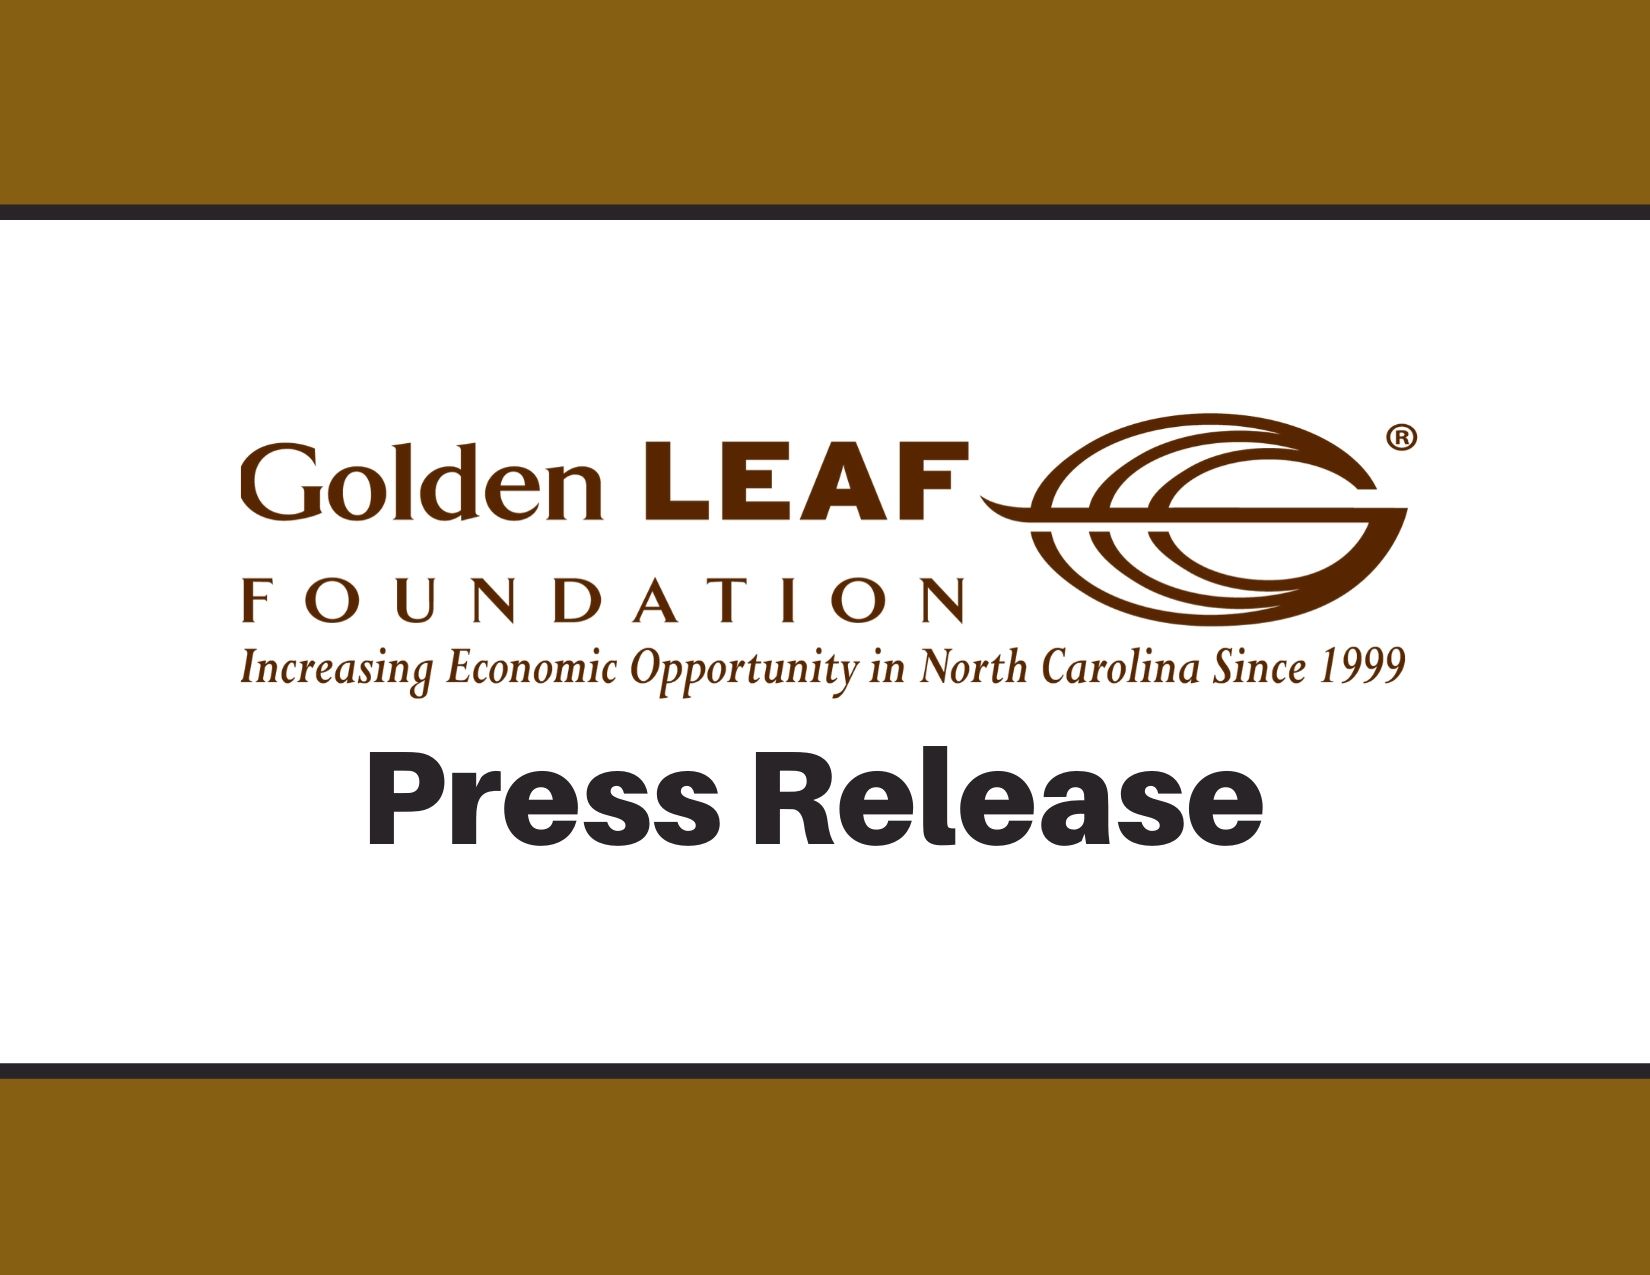 Golden LEAF launches Community-Based Grants Initiative in Northwest Prosperity Zone